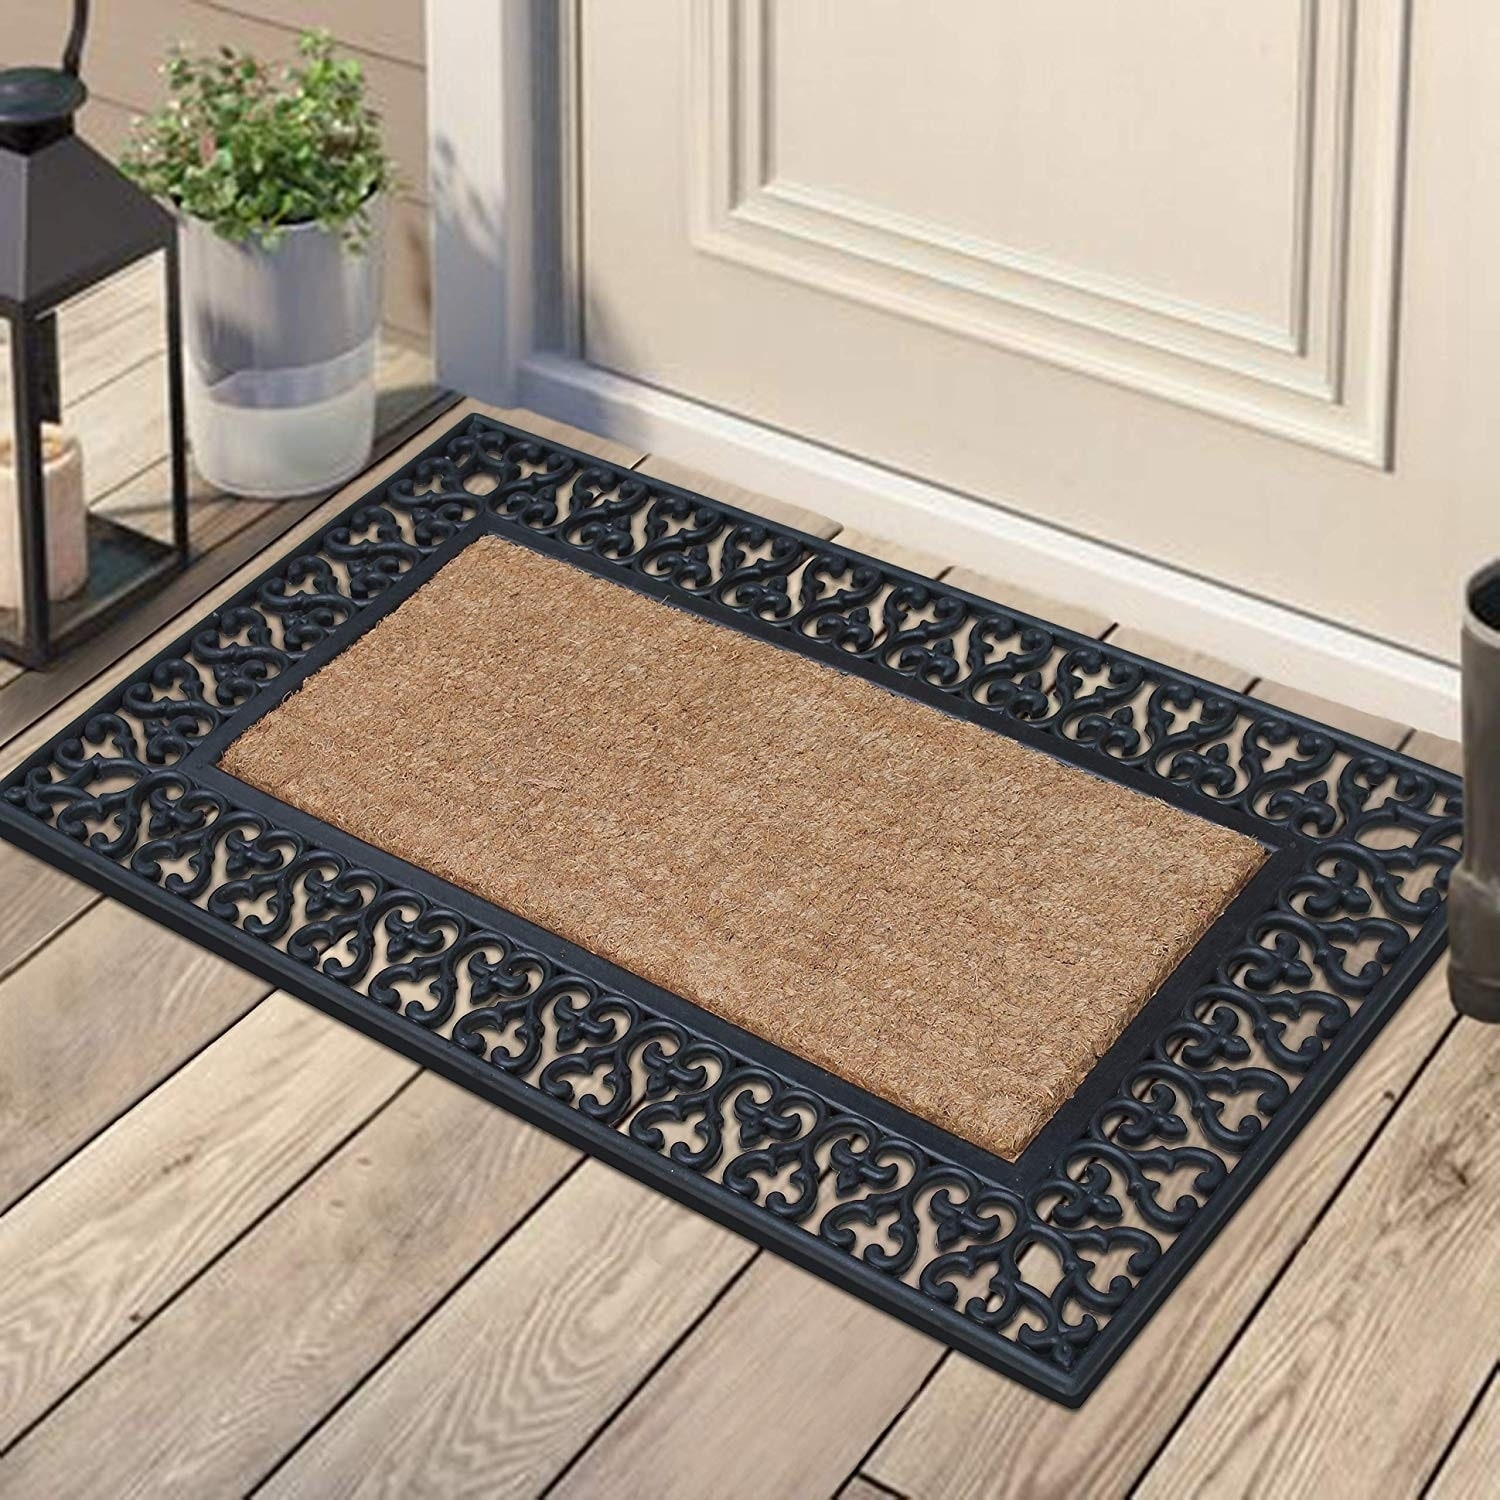 https://ak1.ostkcdn.com/images/products/28984845/A1-Home-Collections-Rubber-and-Coir-Club-Border-Dirt-Trapper-Heavy-Weight-Doormat-18-X30-18-X-30-9595199e-43ea-4f4c-ae34-25a9dcd94cc1.jpg